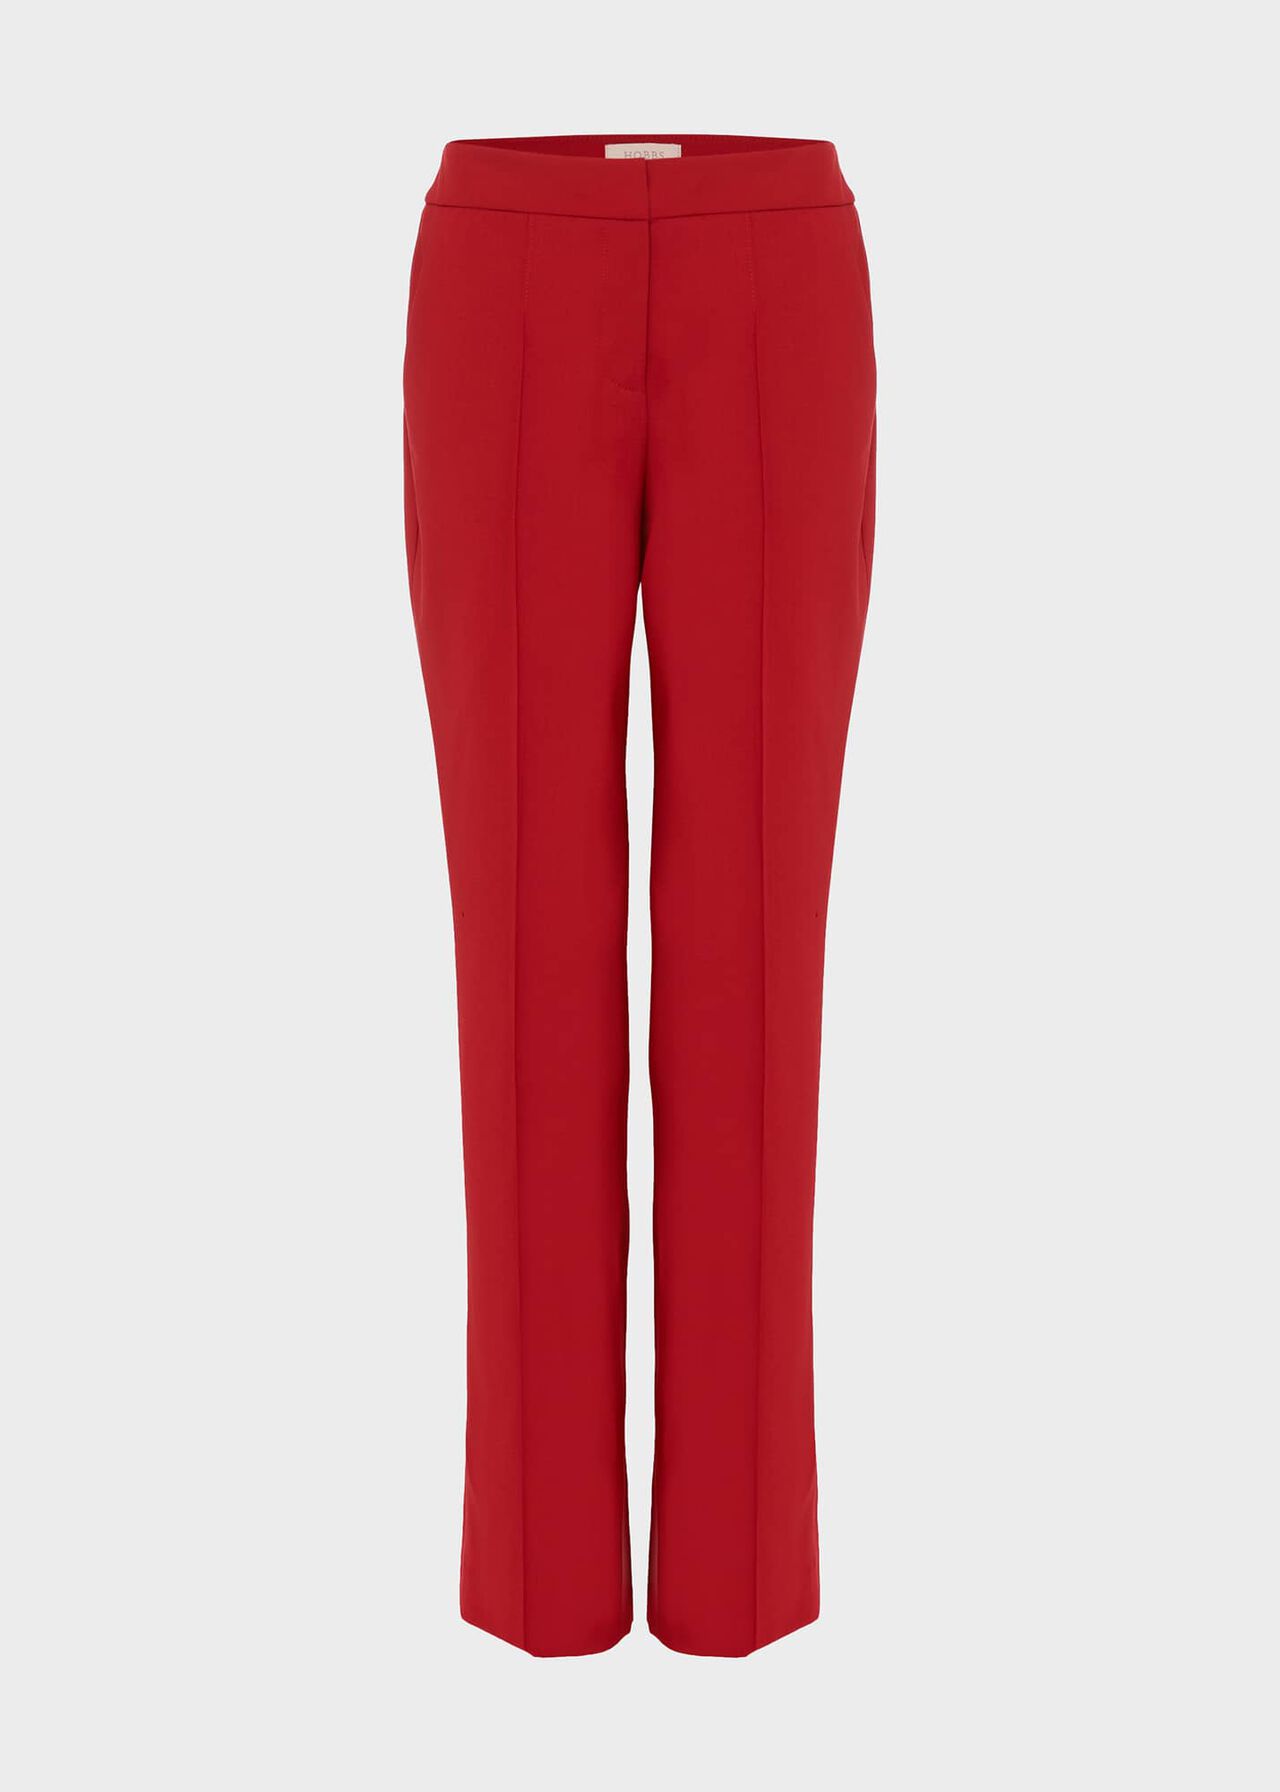 Kyle Wool Blend Straight Trousers, Red, hi-res